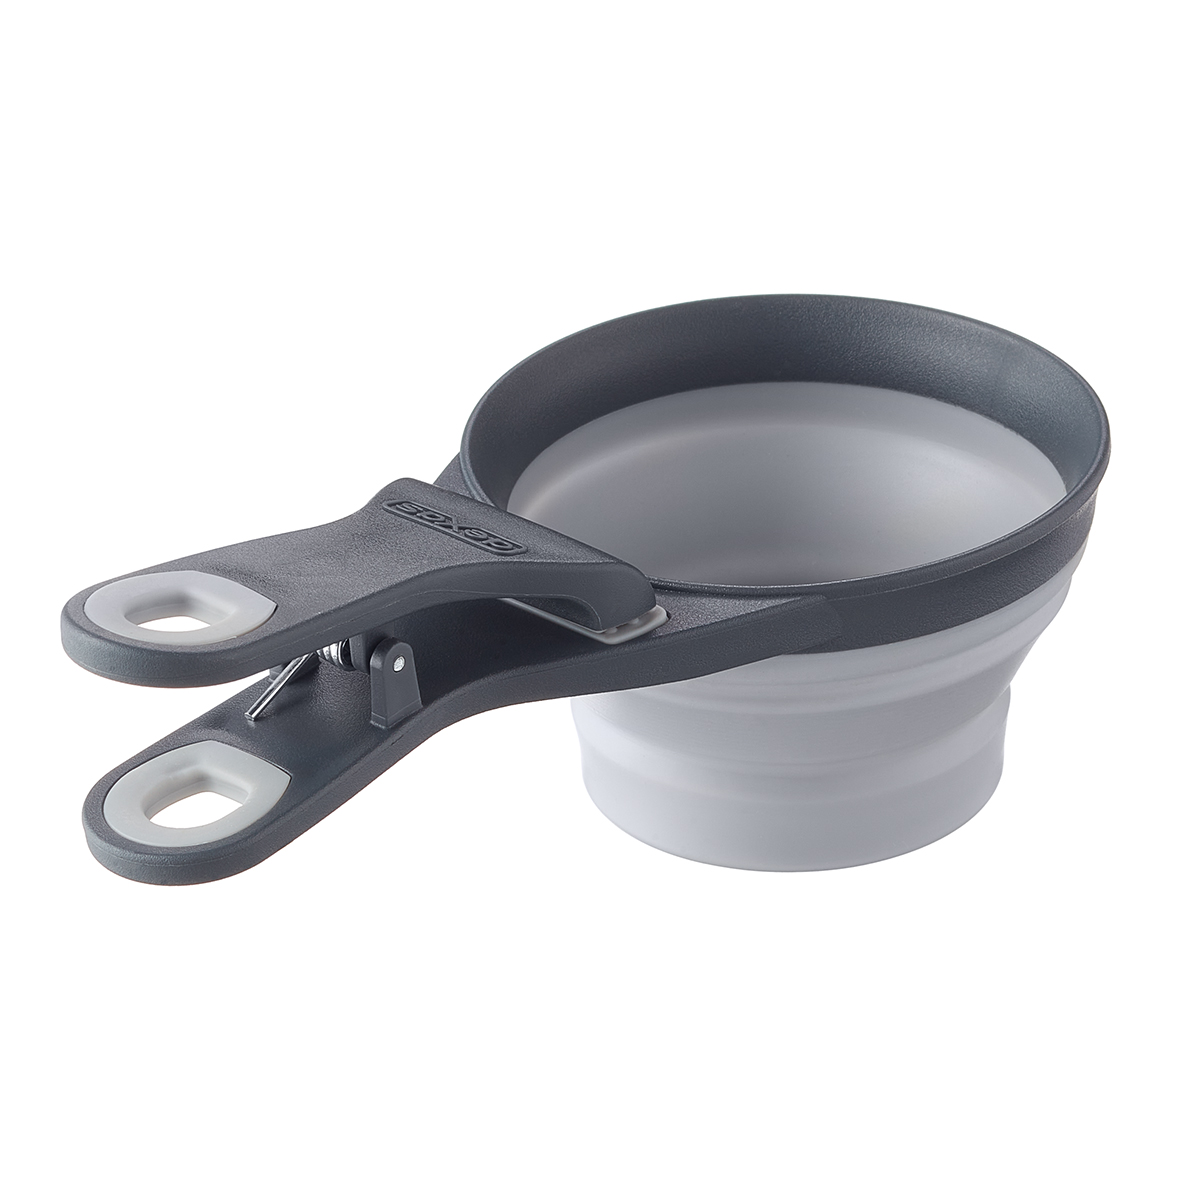 https://www.containerstore.com/catalogimages/457017/10089812-1-cup-collapsible-klipscoop.jpg